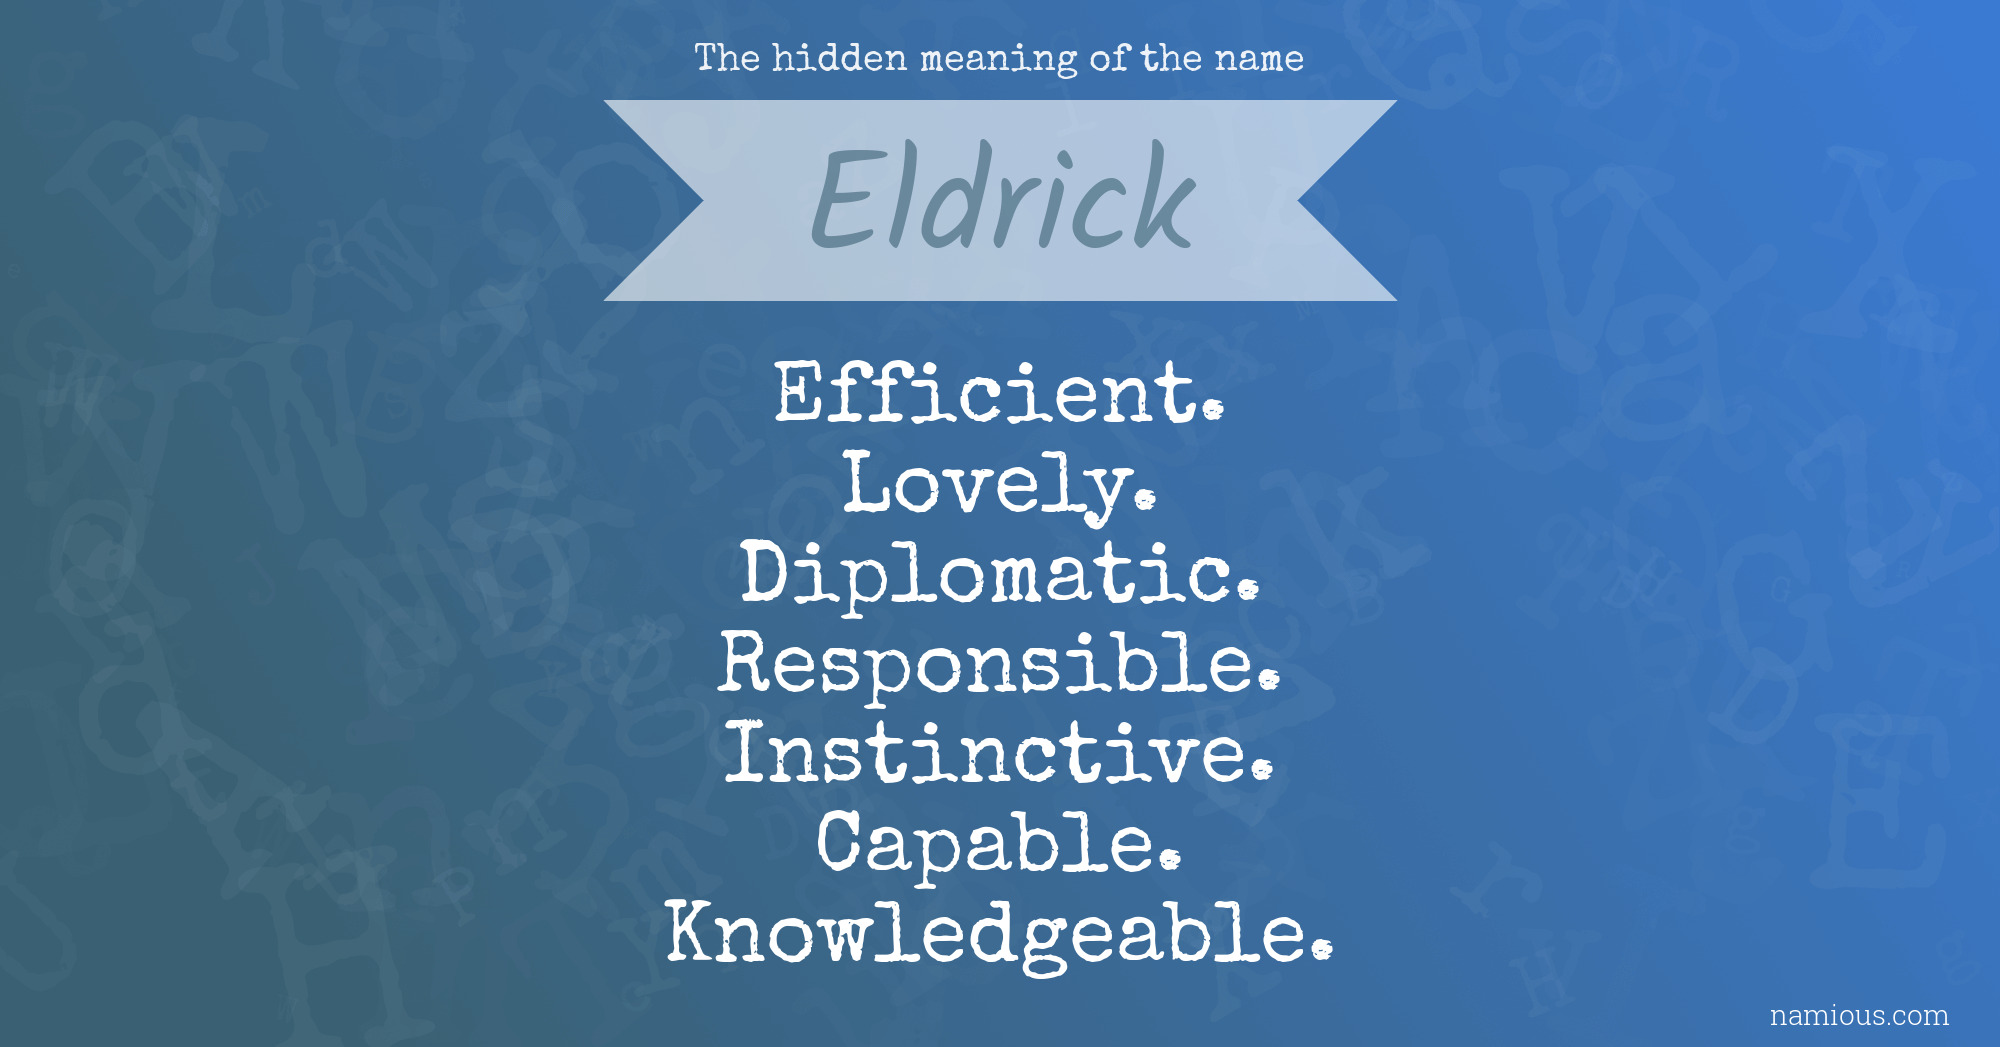 The hidden meaning of the name Eldrick